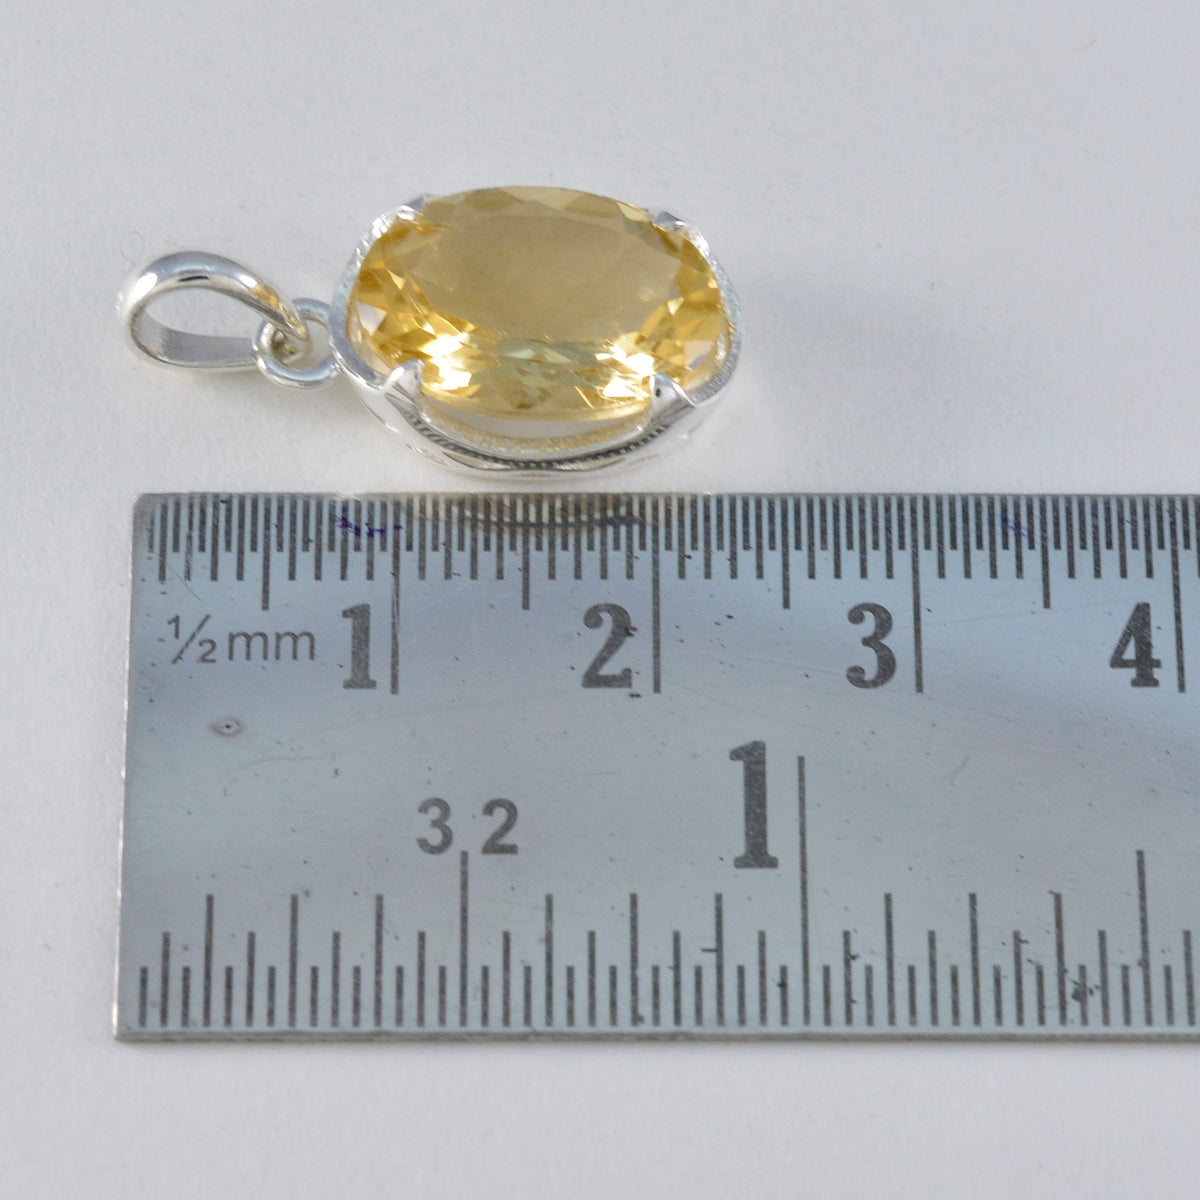 Riyo Irresistible Gems Oval Faceted Yellow Citrine Silver Pendant Gift For Wife